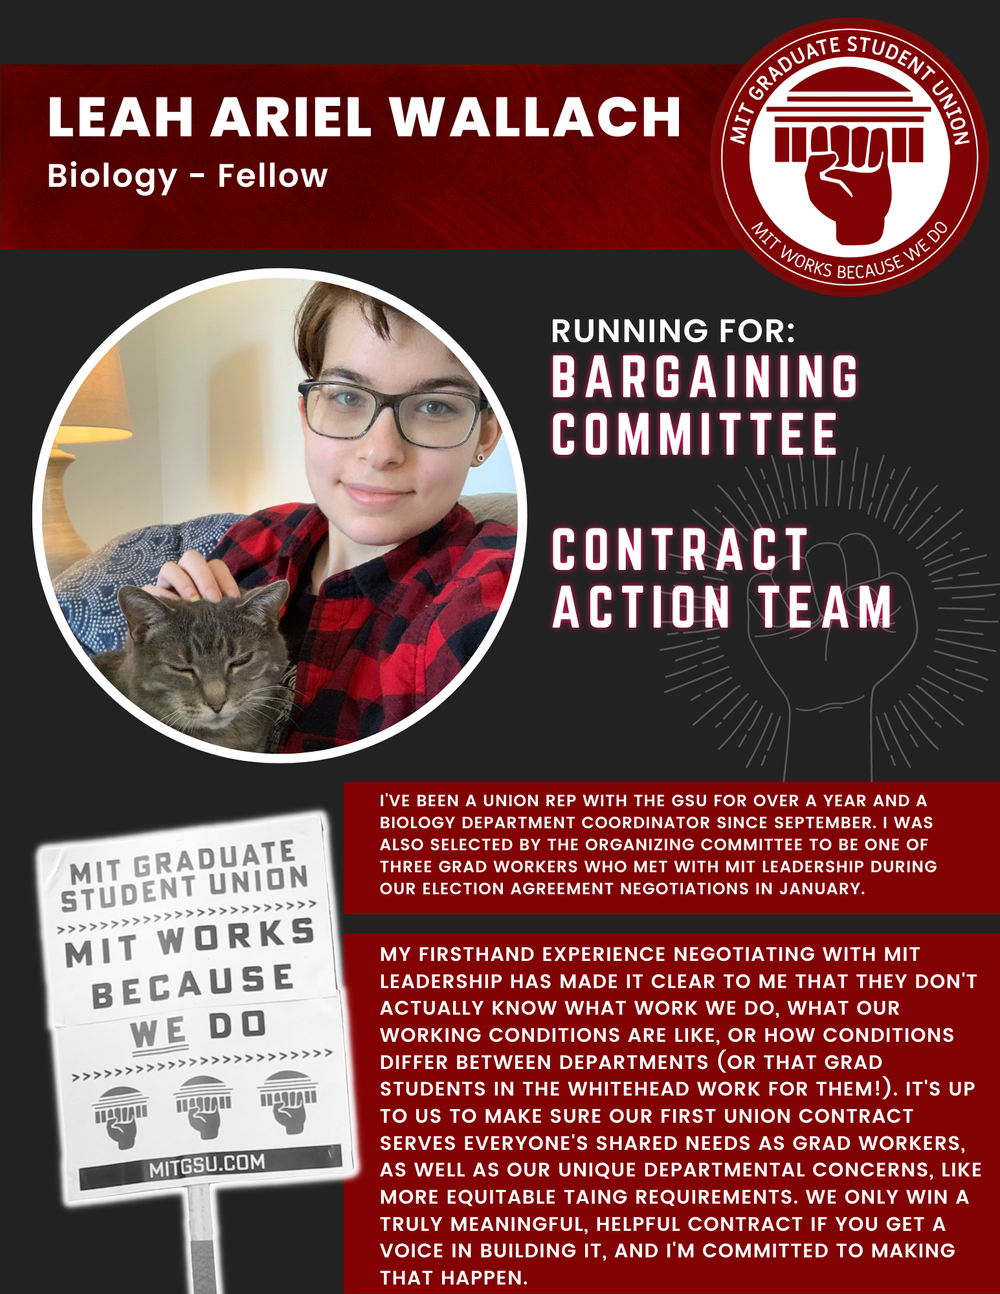  LEAH ARIEL WALLACH  Biology - Fellow   RUNNING FOR: Bargaining Committee  Contract Action Team  I'VE BEEN A UNION REP WITH THE GSU FOR OVER A YEAR AND A BIOLOGY DEPARTMENT COORDINATOR SINCE SEPTEMBER. I WAS ALSO SELECTED BY THE ORGANIZING COMMITTEE 